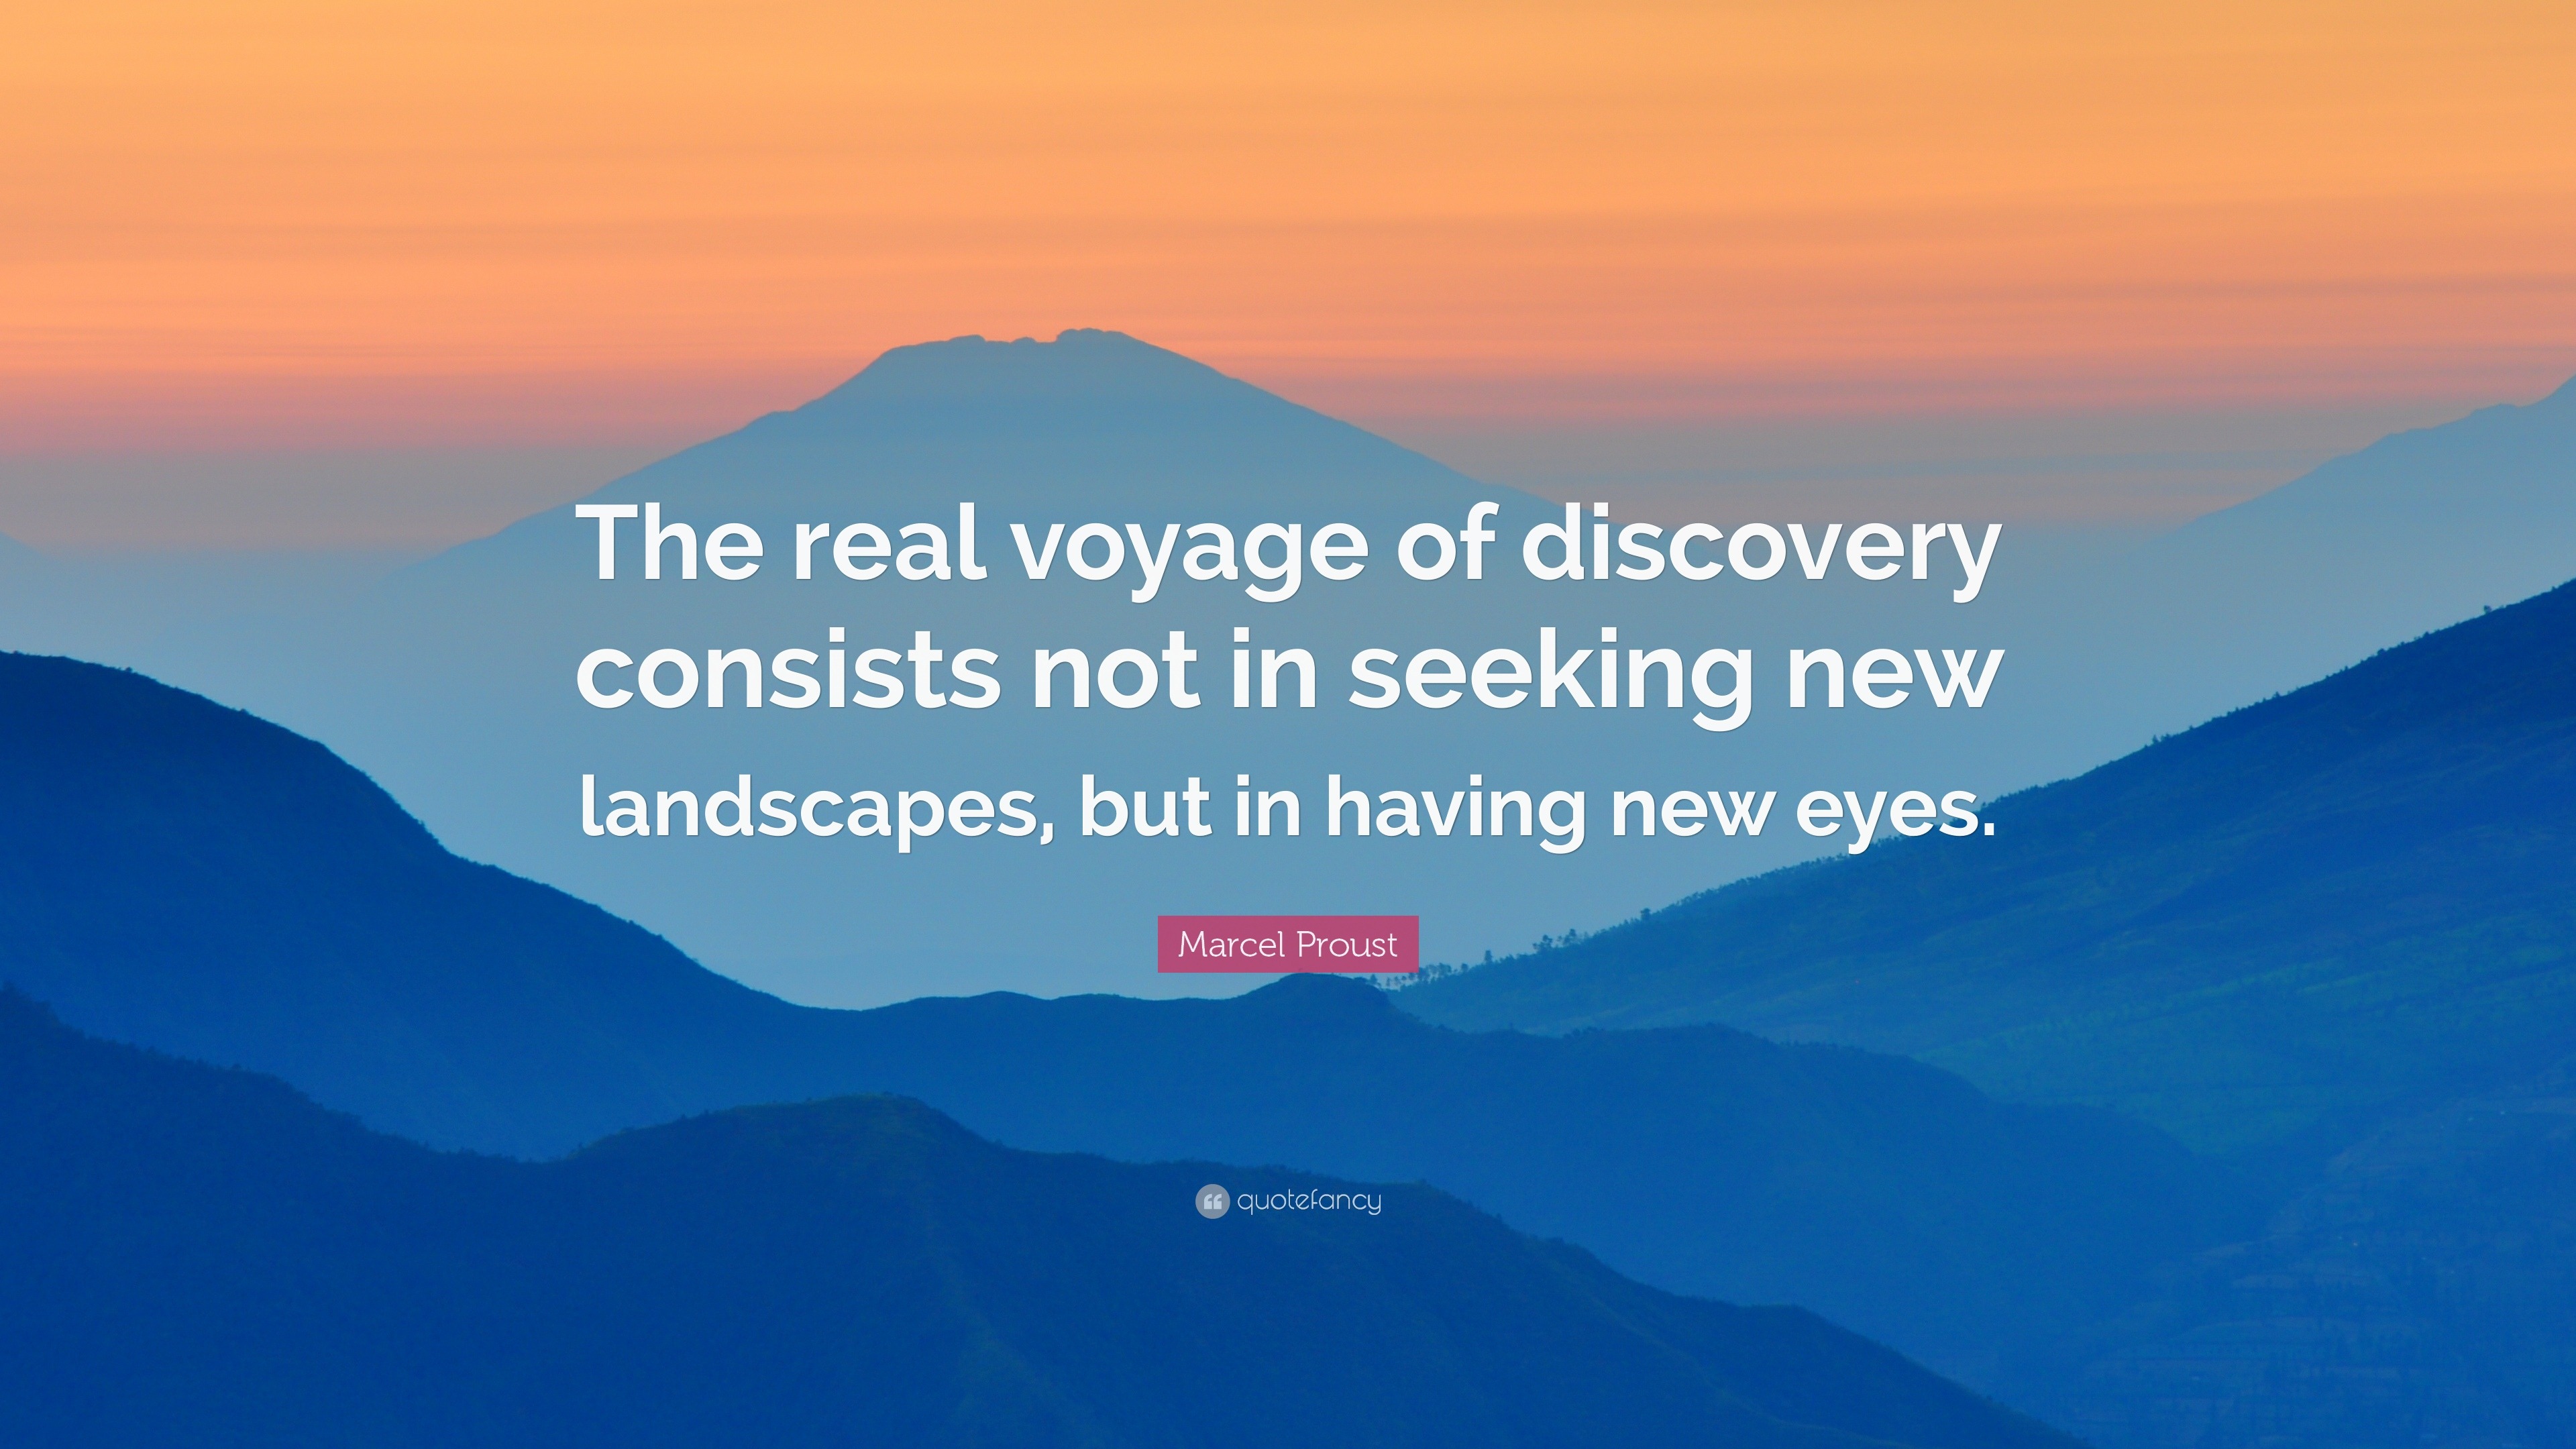 the real voyage of discovery quote meaning